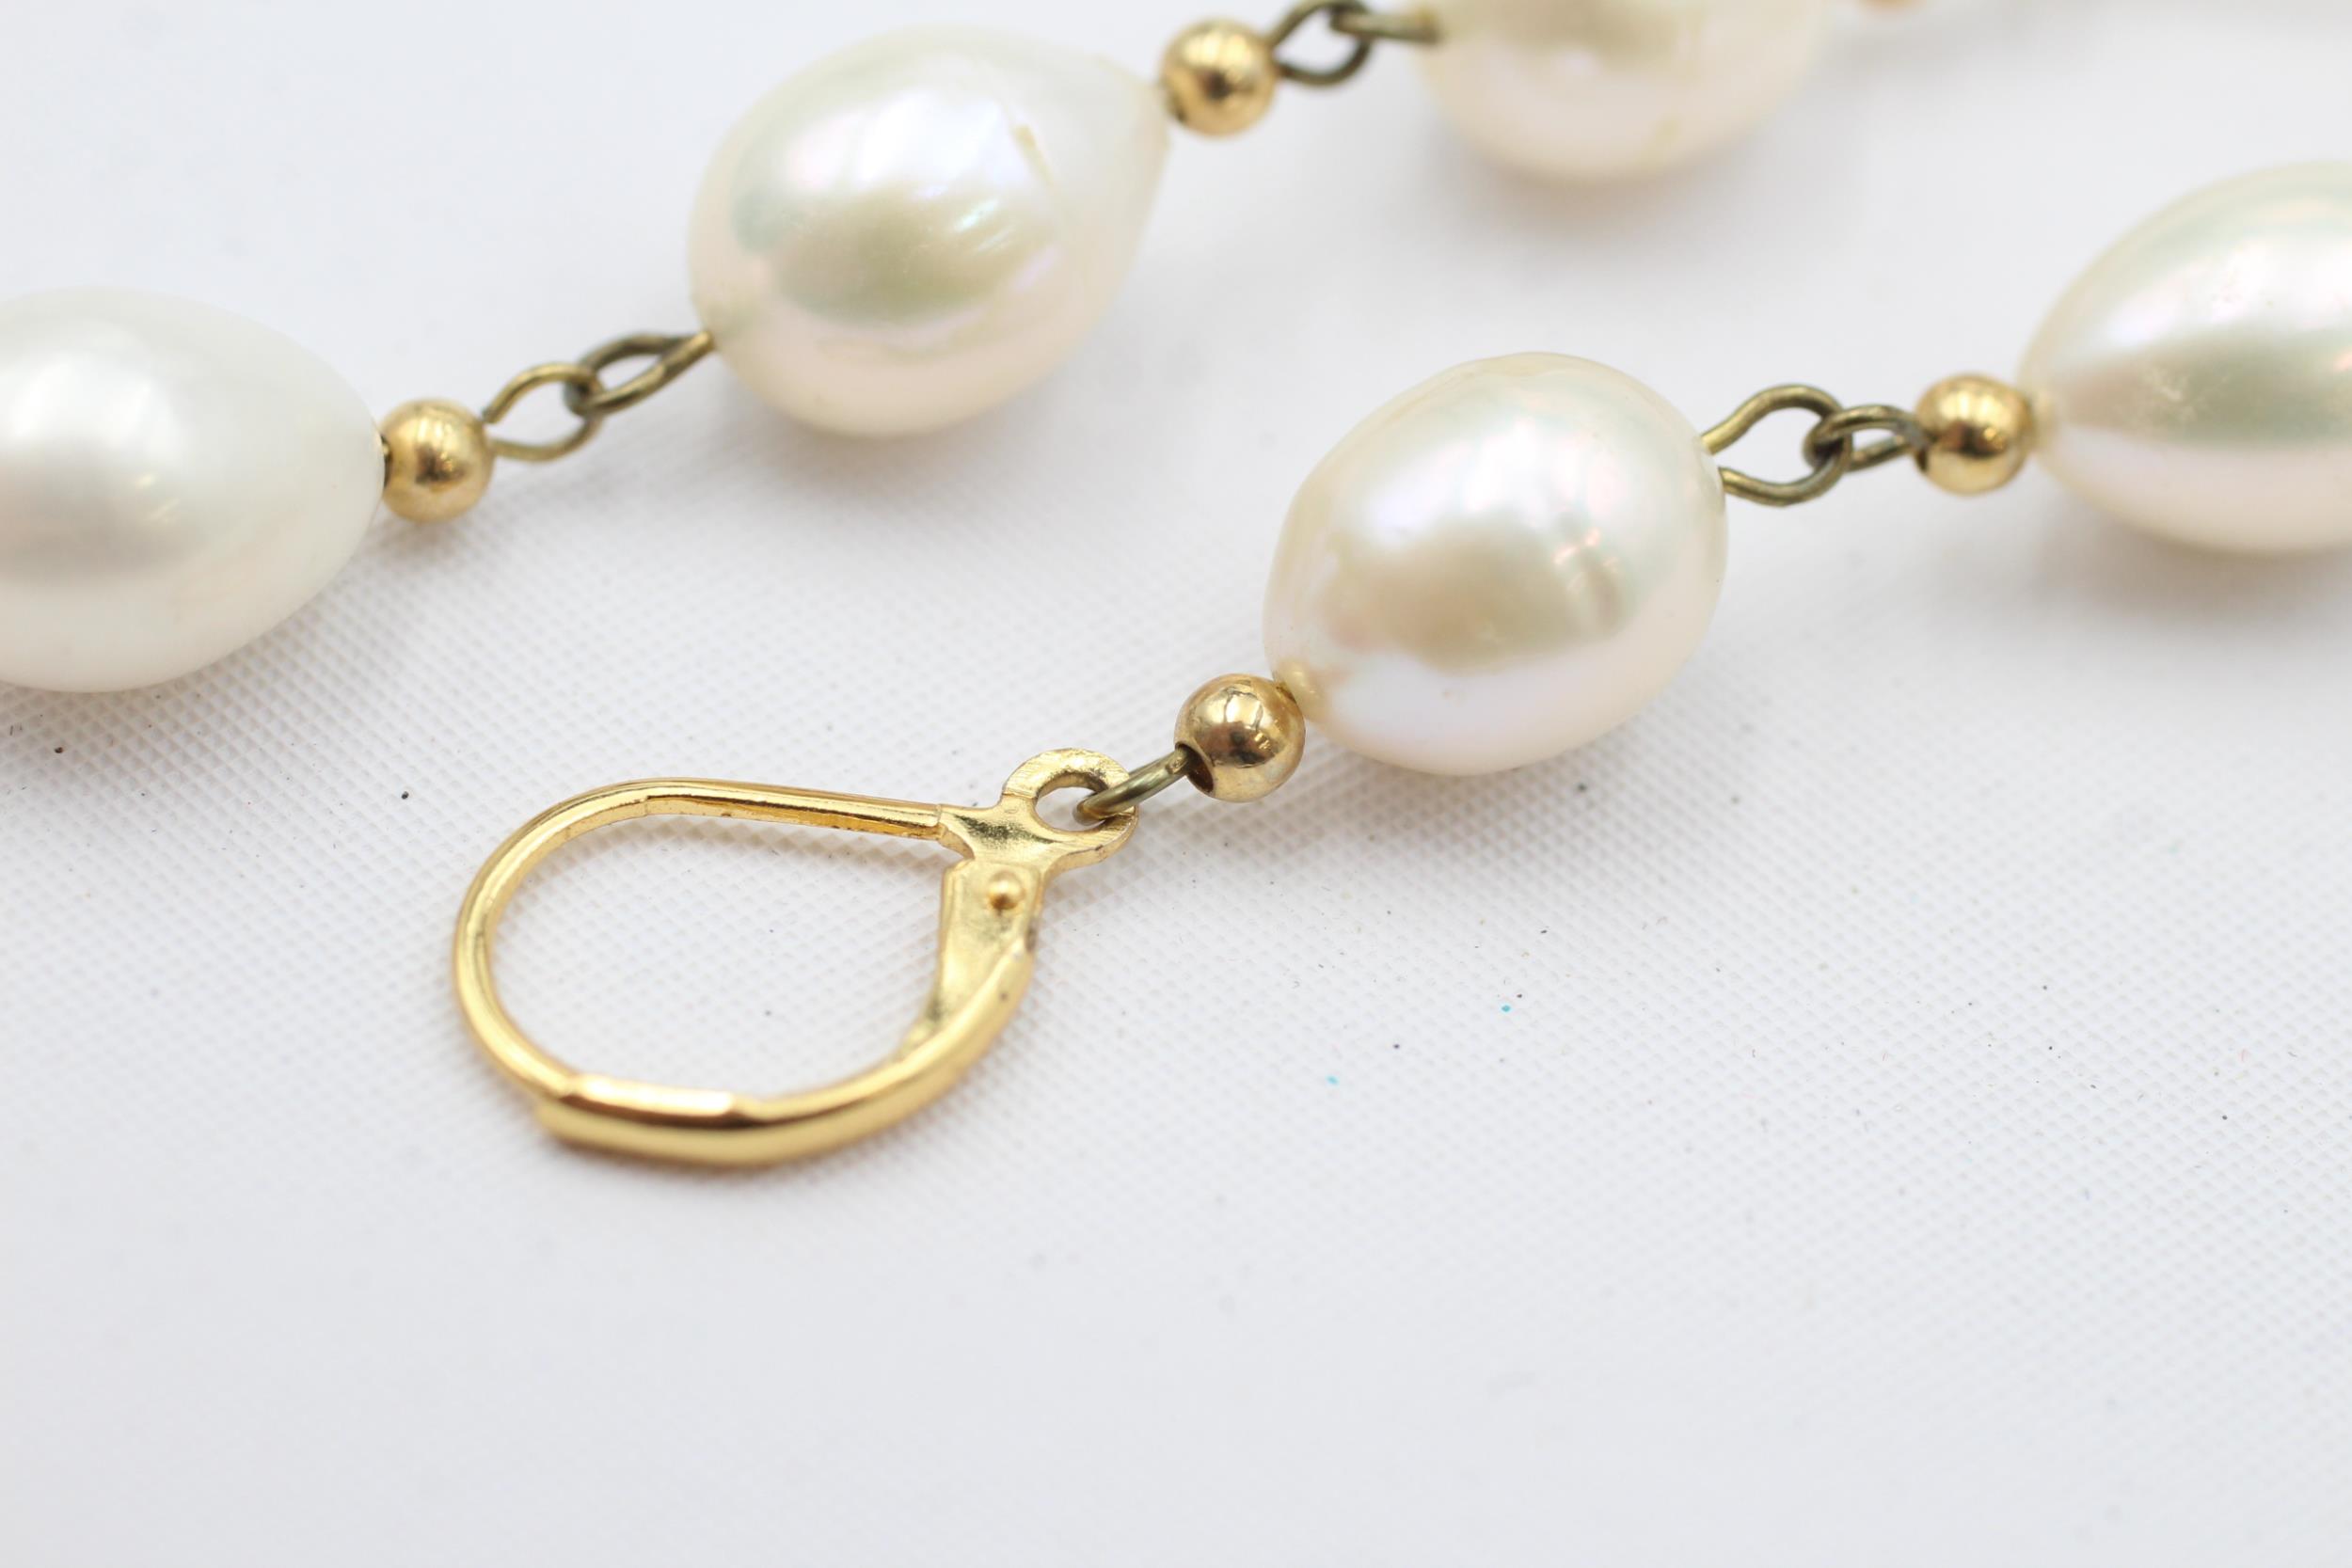 14ct gold freshwater pearl drop earrings (9.8g) - Image 3 of 5